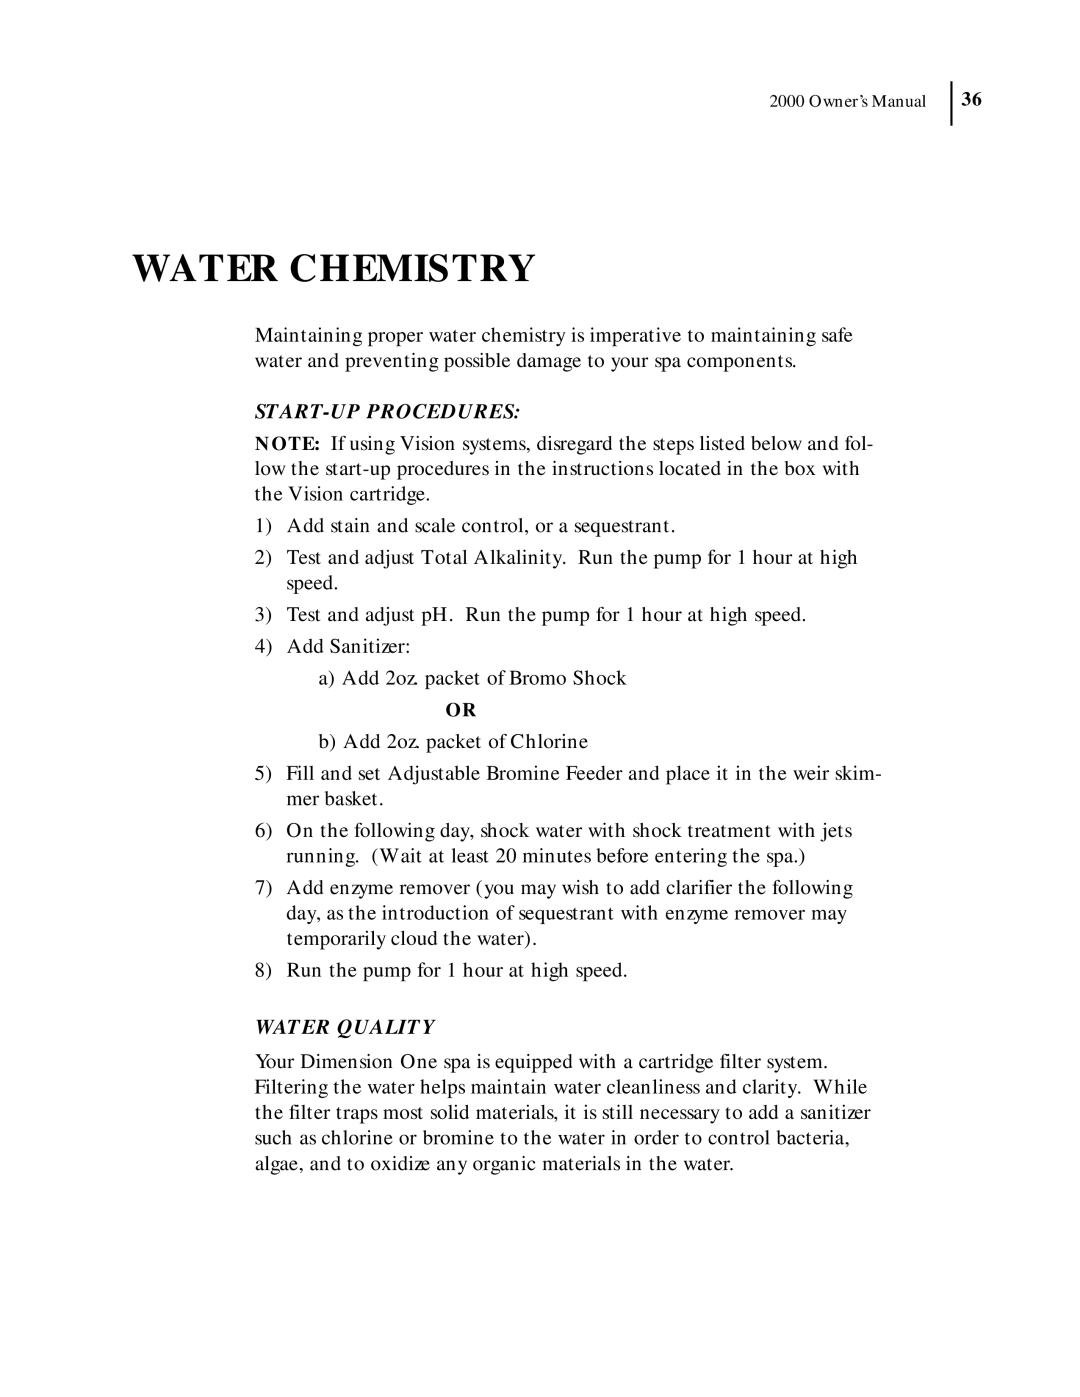 Dimension One Spas 2000 Model manual Water Chemistry, Start-Upprocedures, Water Quality 